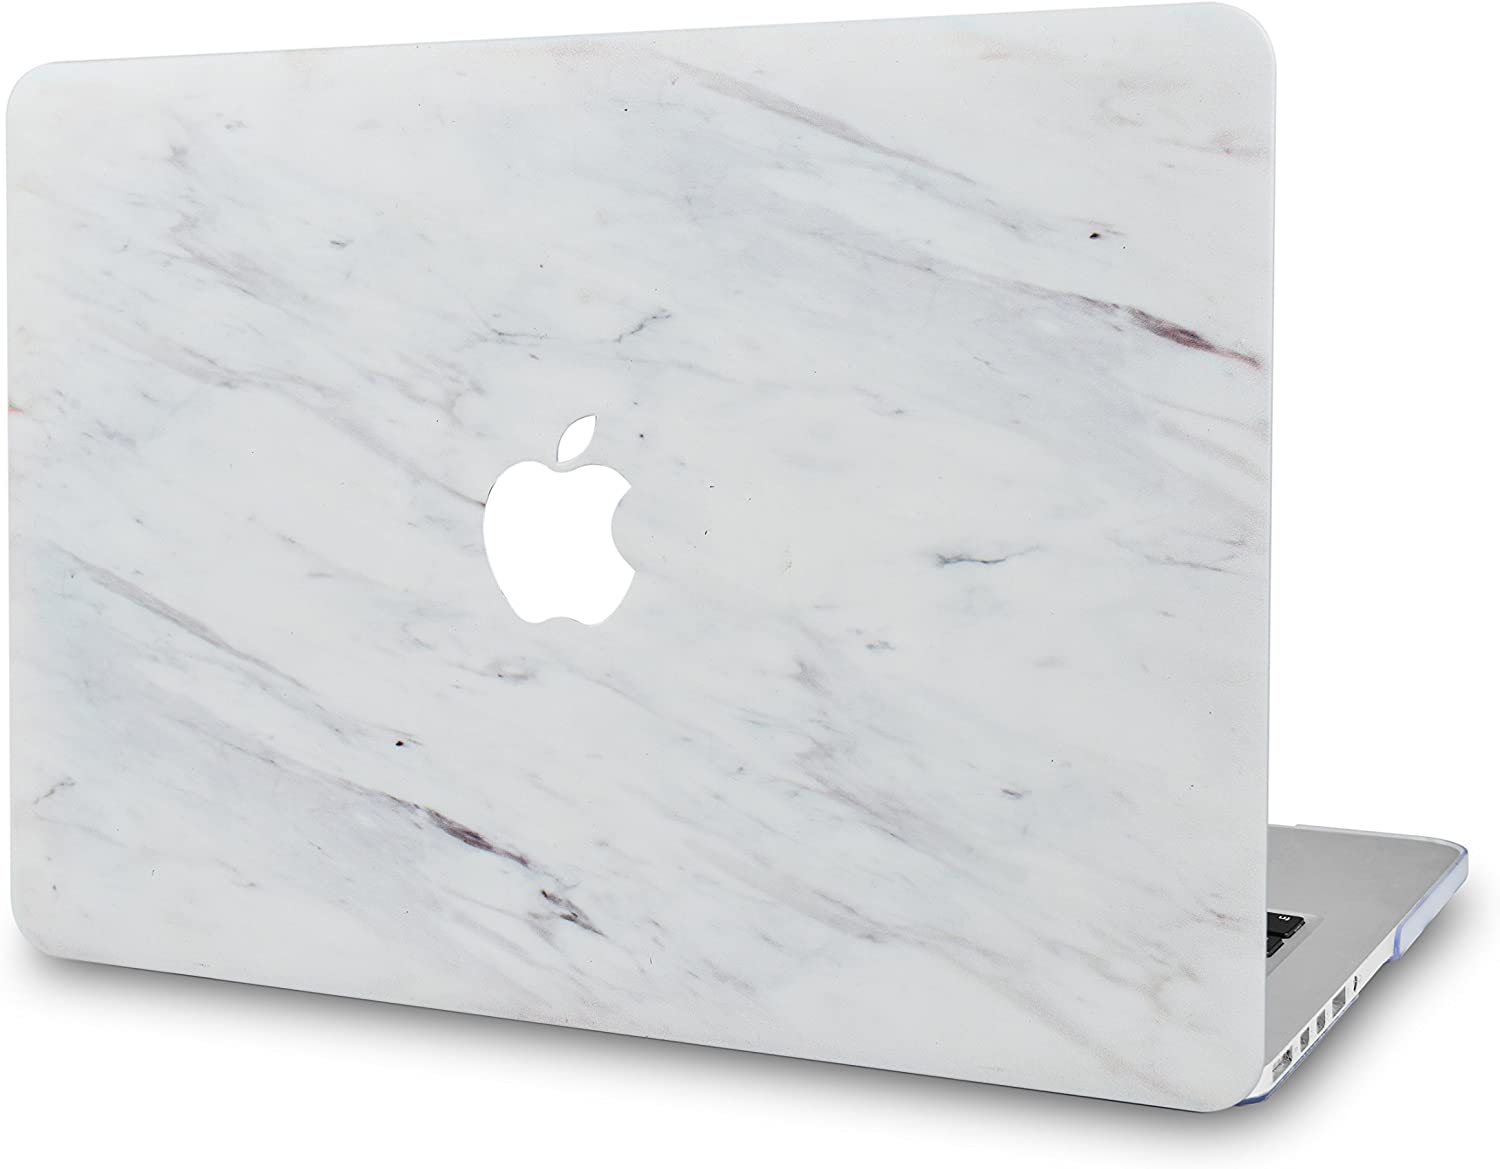 SILK WHITE MARBLE - MacBook Air 13 inch Case 2018 - 2020 Release. Plastic Pattern Hard Shell keyboard & screen protectors Compatible with MacBook Air 13. - e4cents